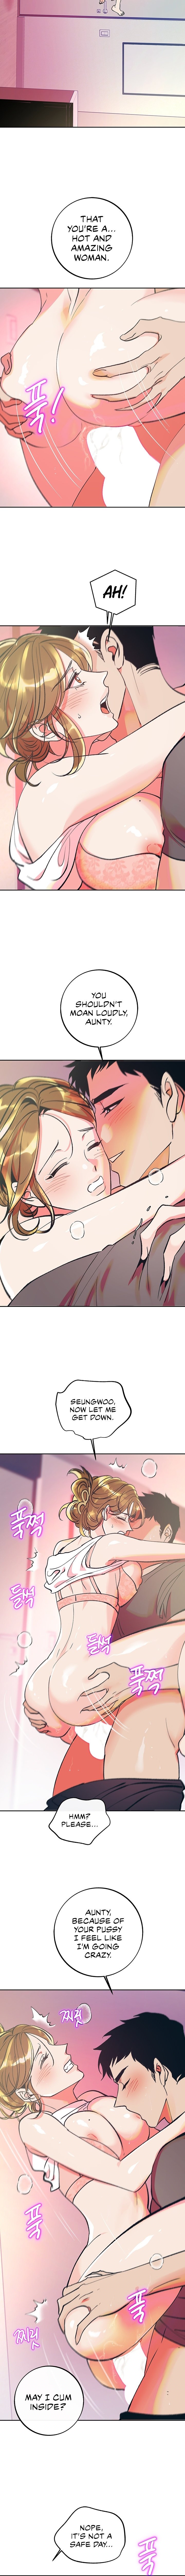 the-memories-of-that-summer-day-chap-32-4